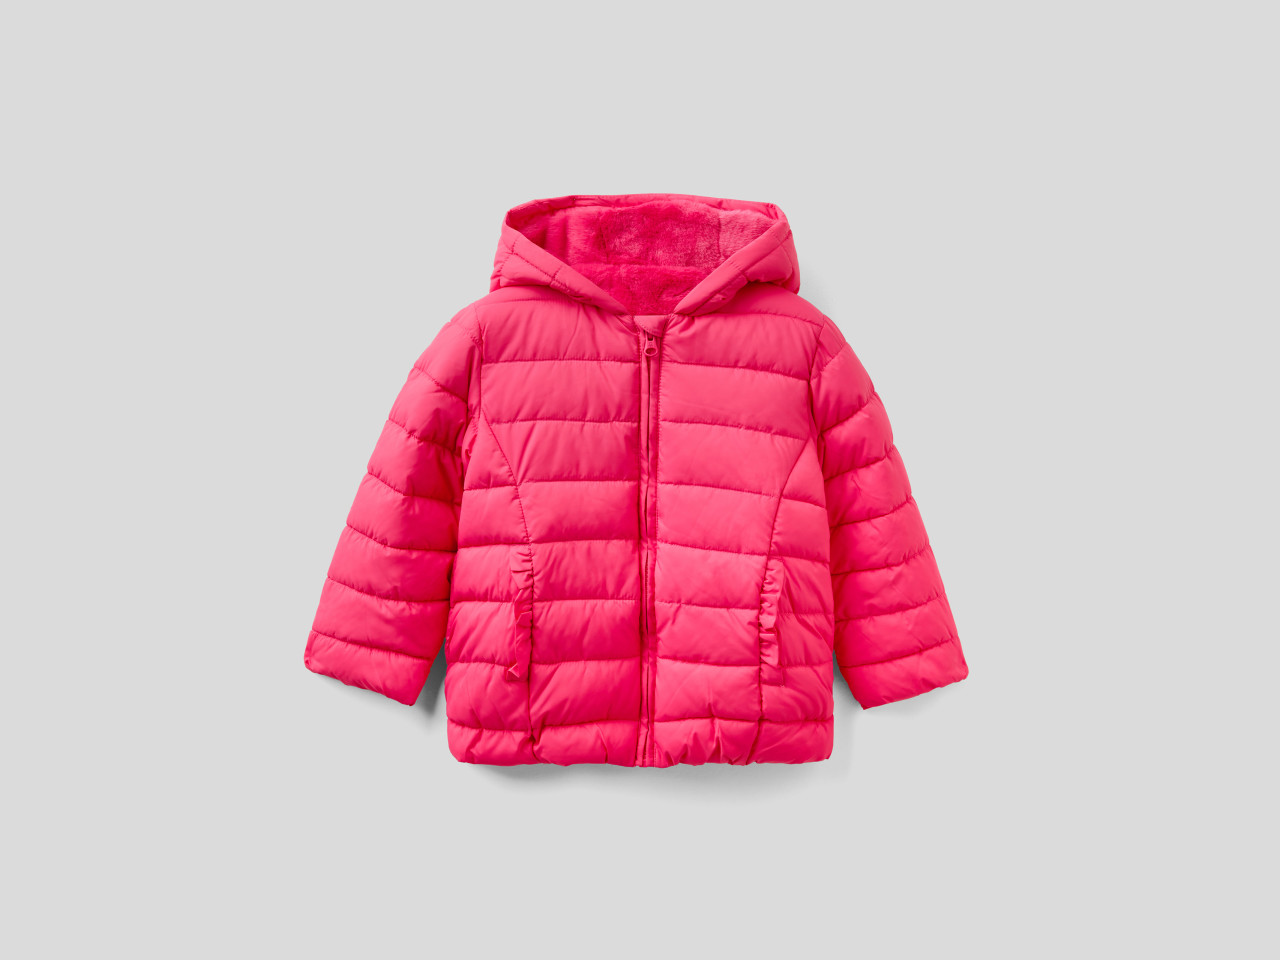 Benetton Baby girl coat from Benetton age 9 months 